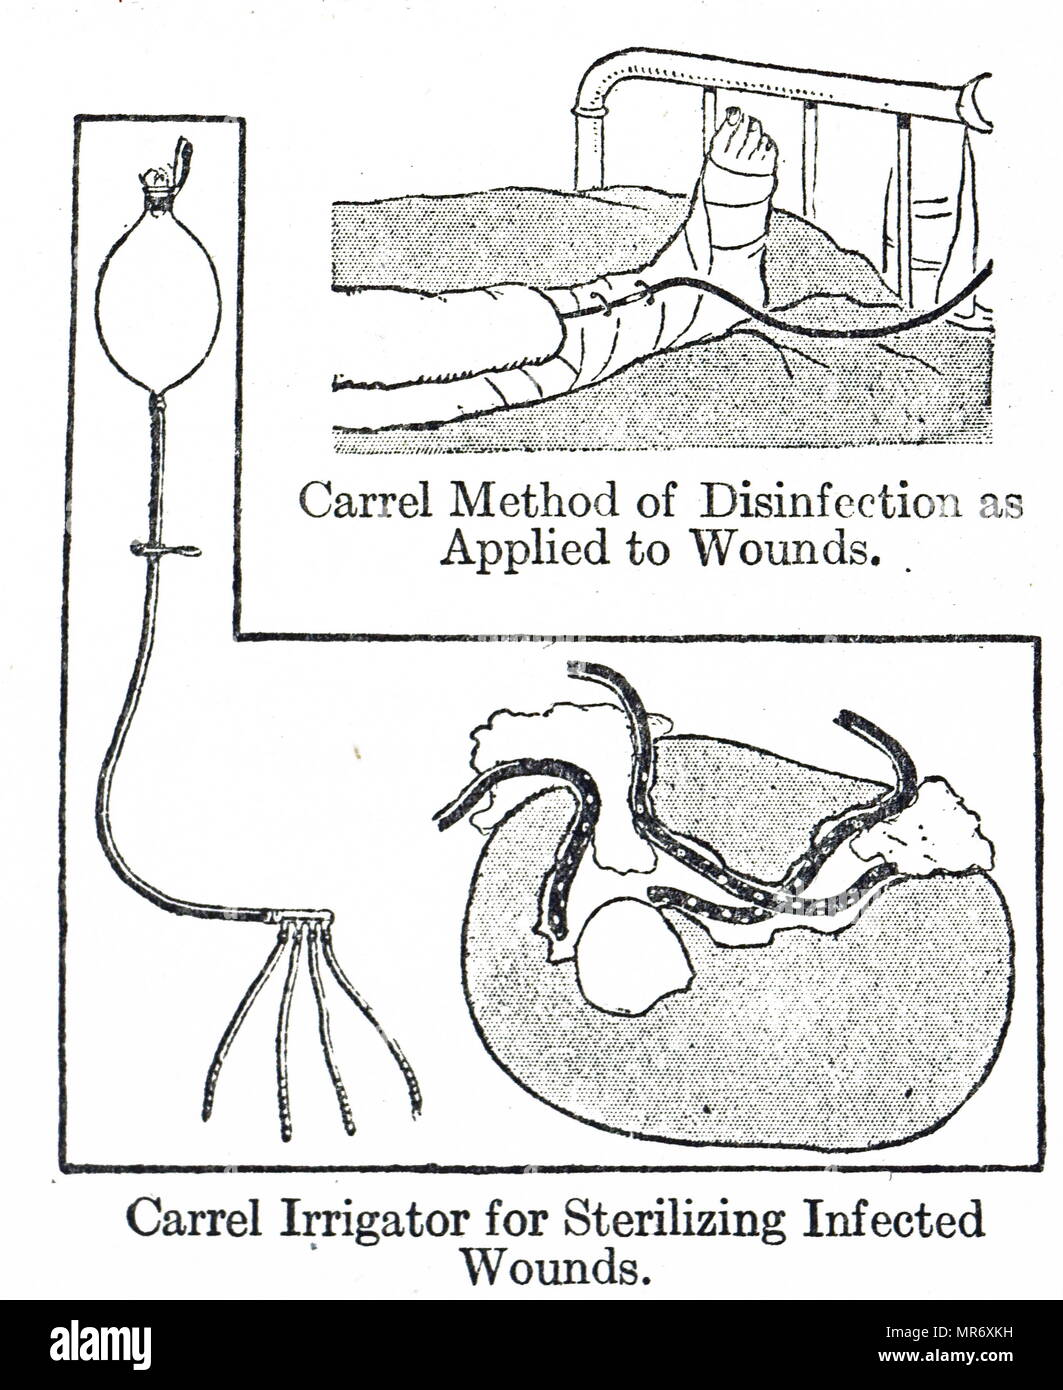 Method of sterilising wounds using Dakin's sodium hypochlorite 0.05 per cent, devised by Dr Alexis Carrel of the Rockefeller Institute. Left and bottom, irrigator and sectional view of wound: right top, device applied to a leg wound. Dated 20th century Stock Photo